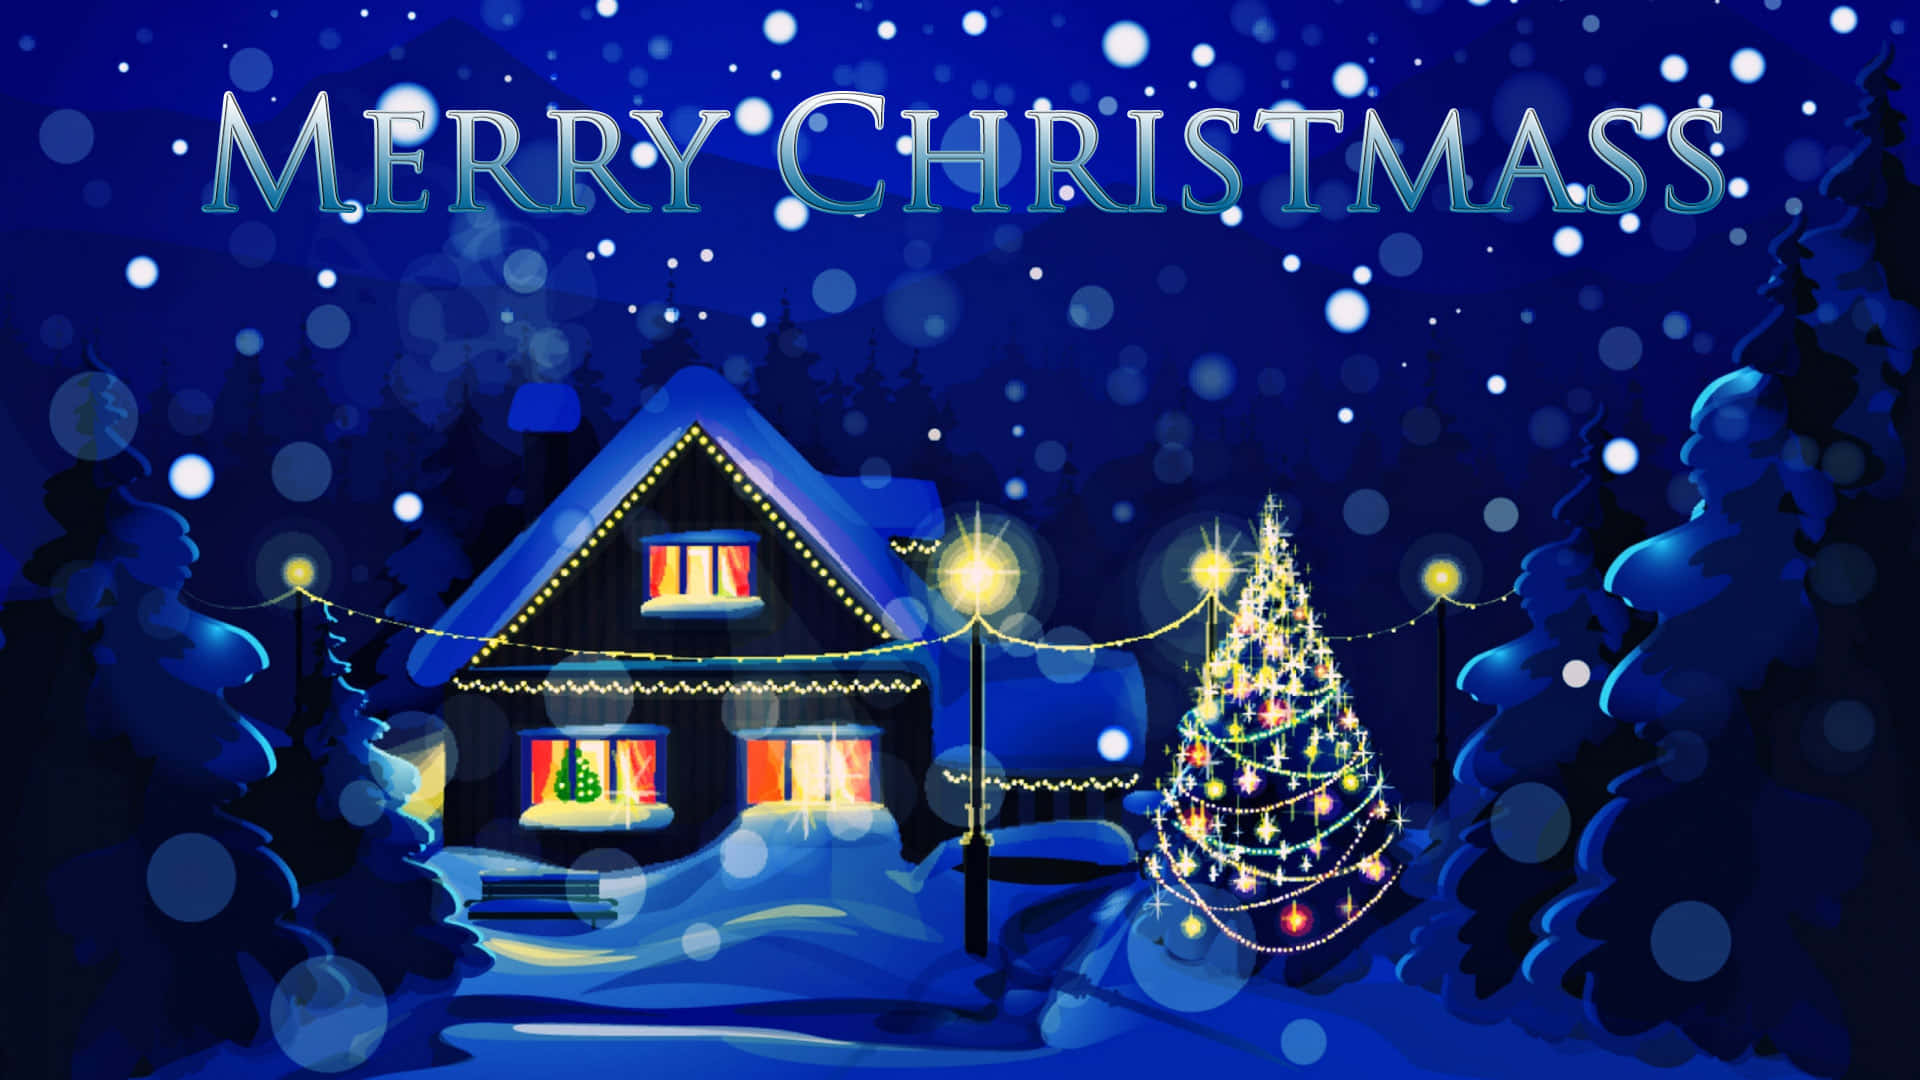 Download 3D Christmas Scene with a Christmas Tree and Village Wallpaper ...